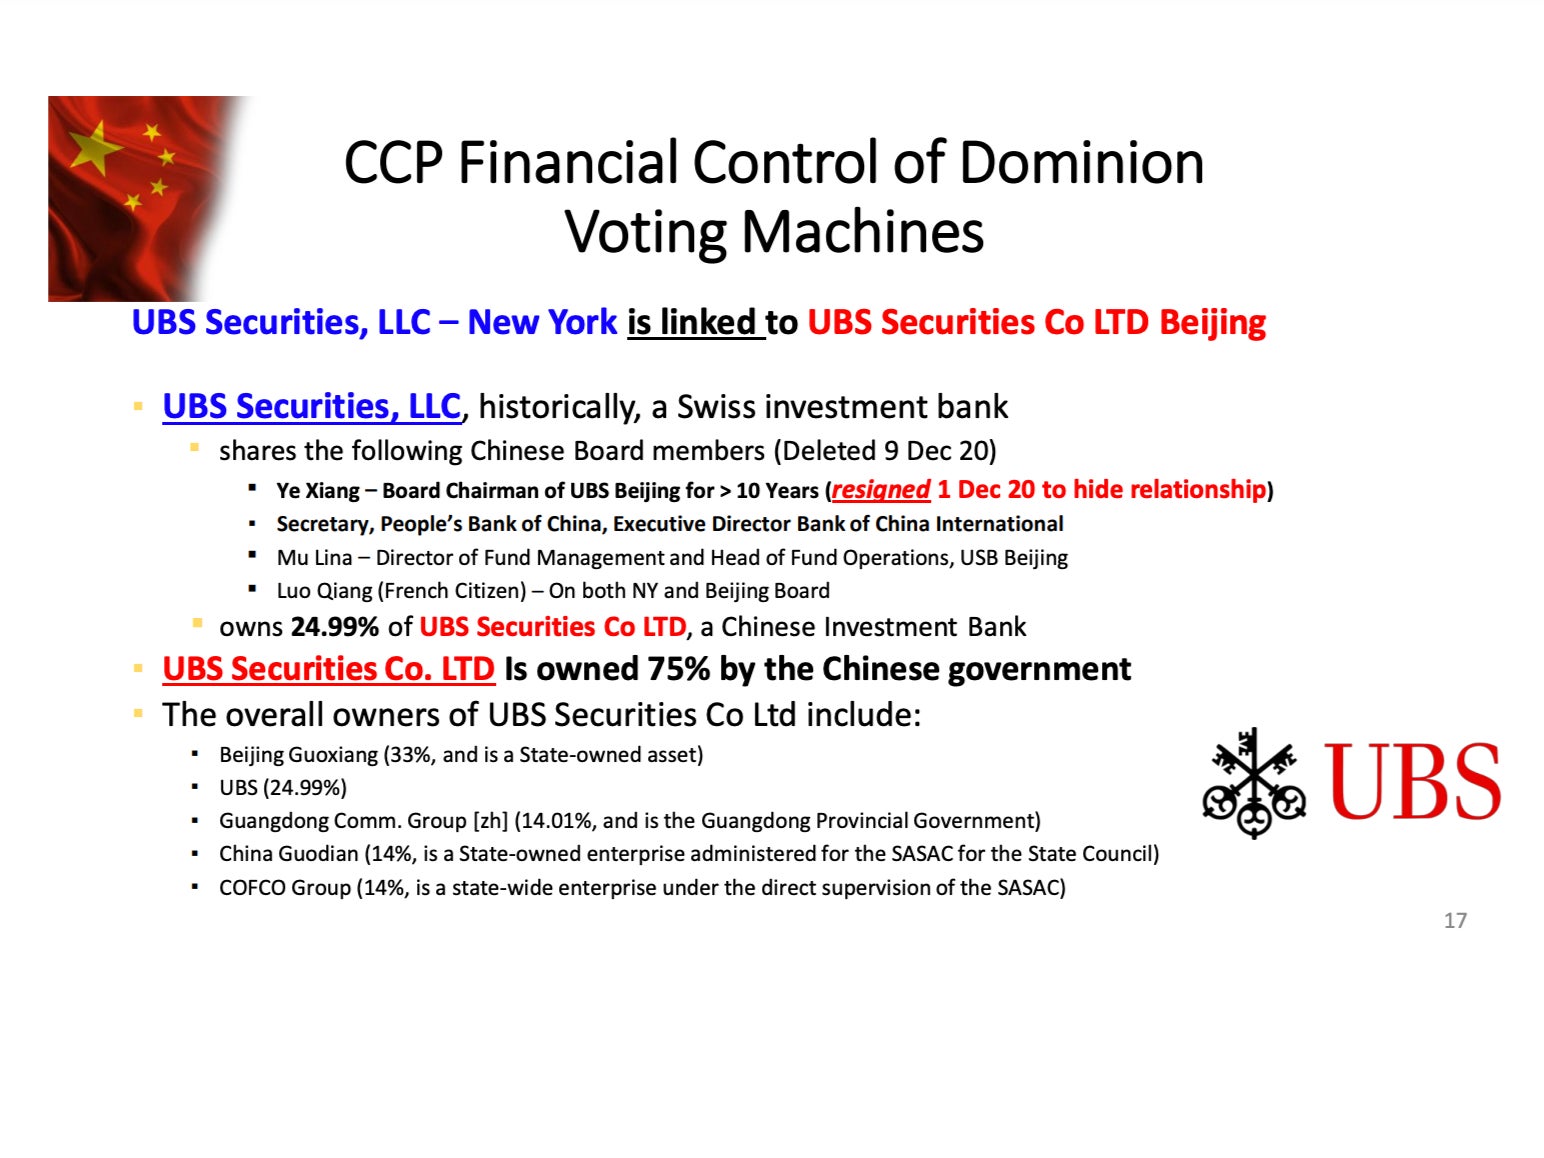 One slide claims that the Chinese Communist Party have financial control of voting machines used in the 2020 election